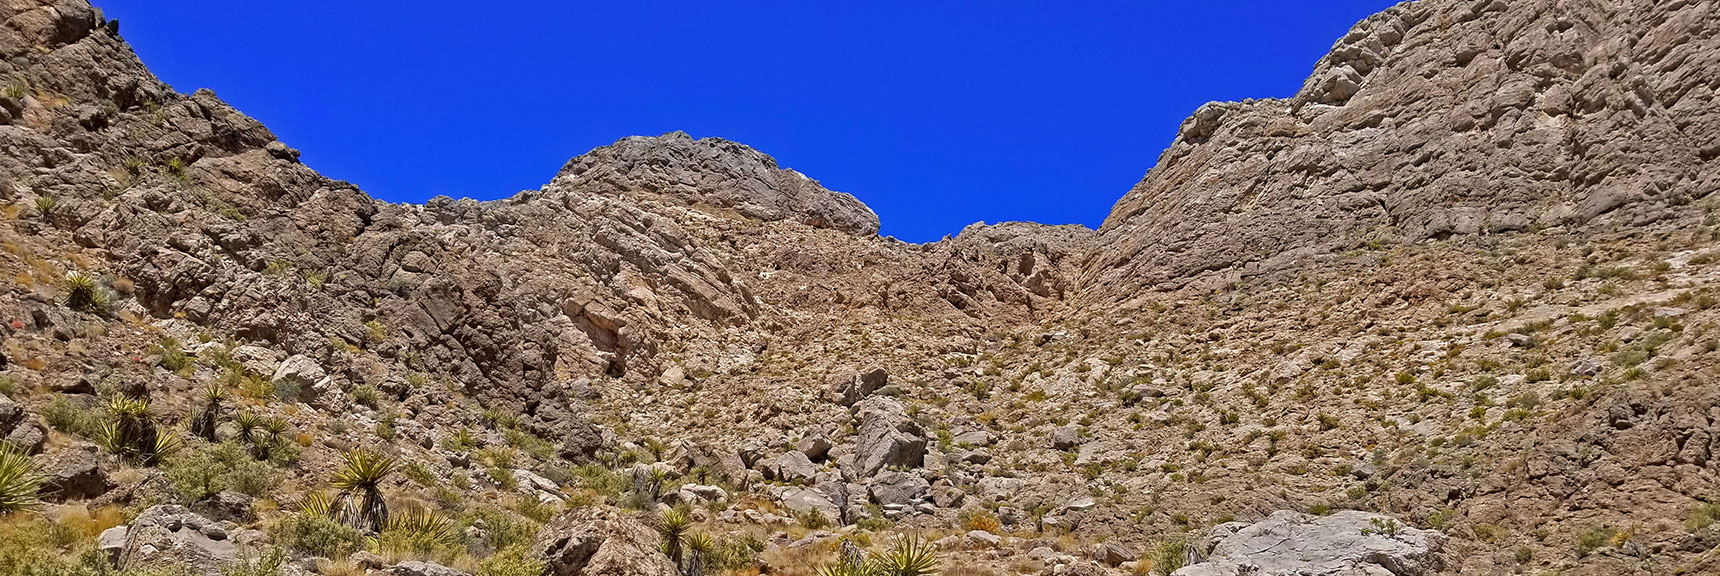 Closing in on the Saddle | Little La Madre Mt, Little El Padre Mt, Little Burnt Peak | Near La Madre Mountains Wilderness, Nevada